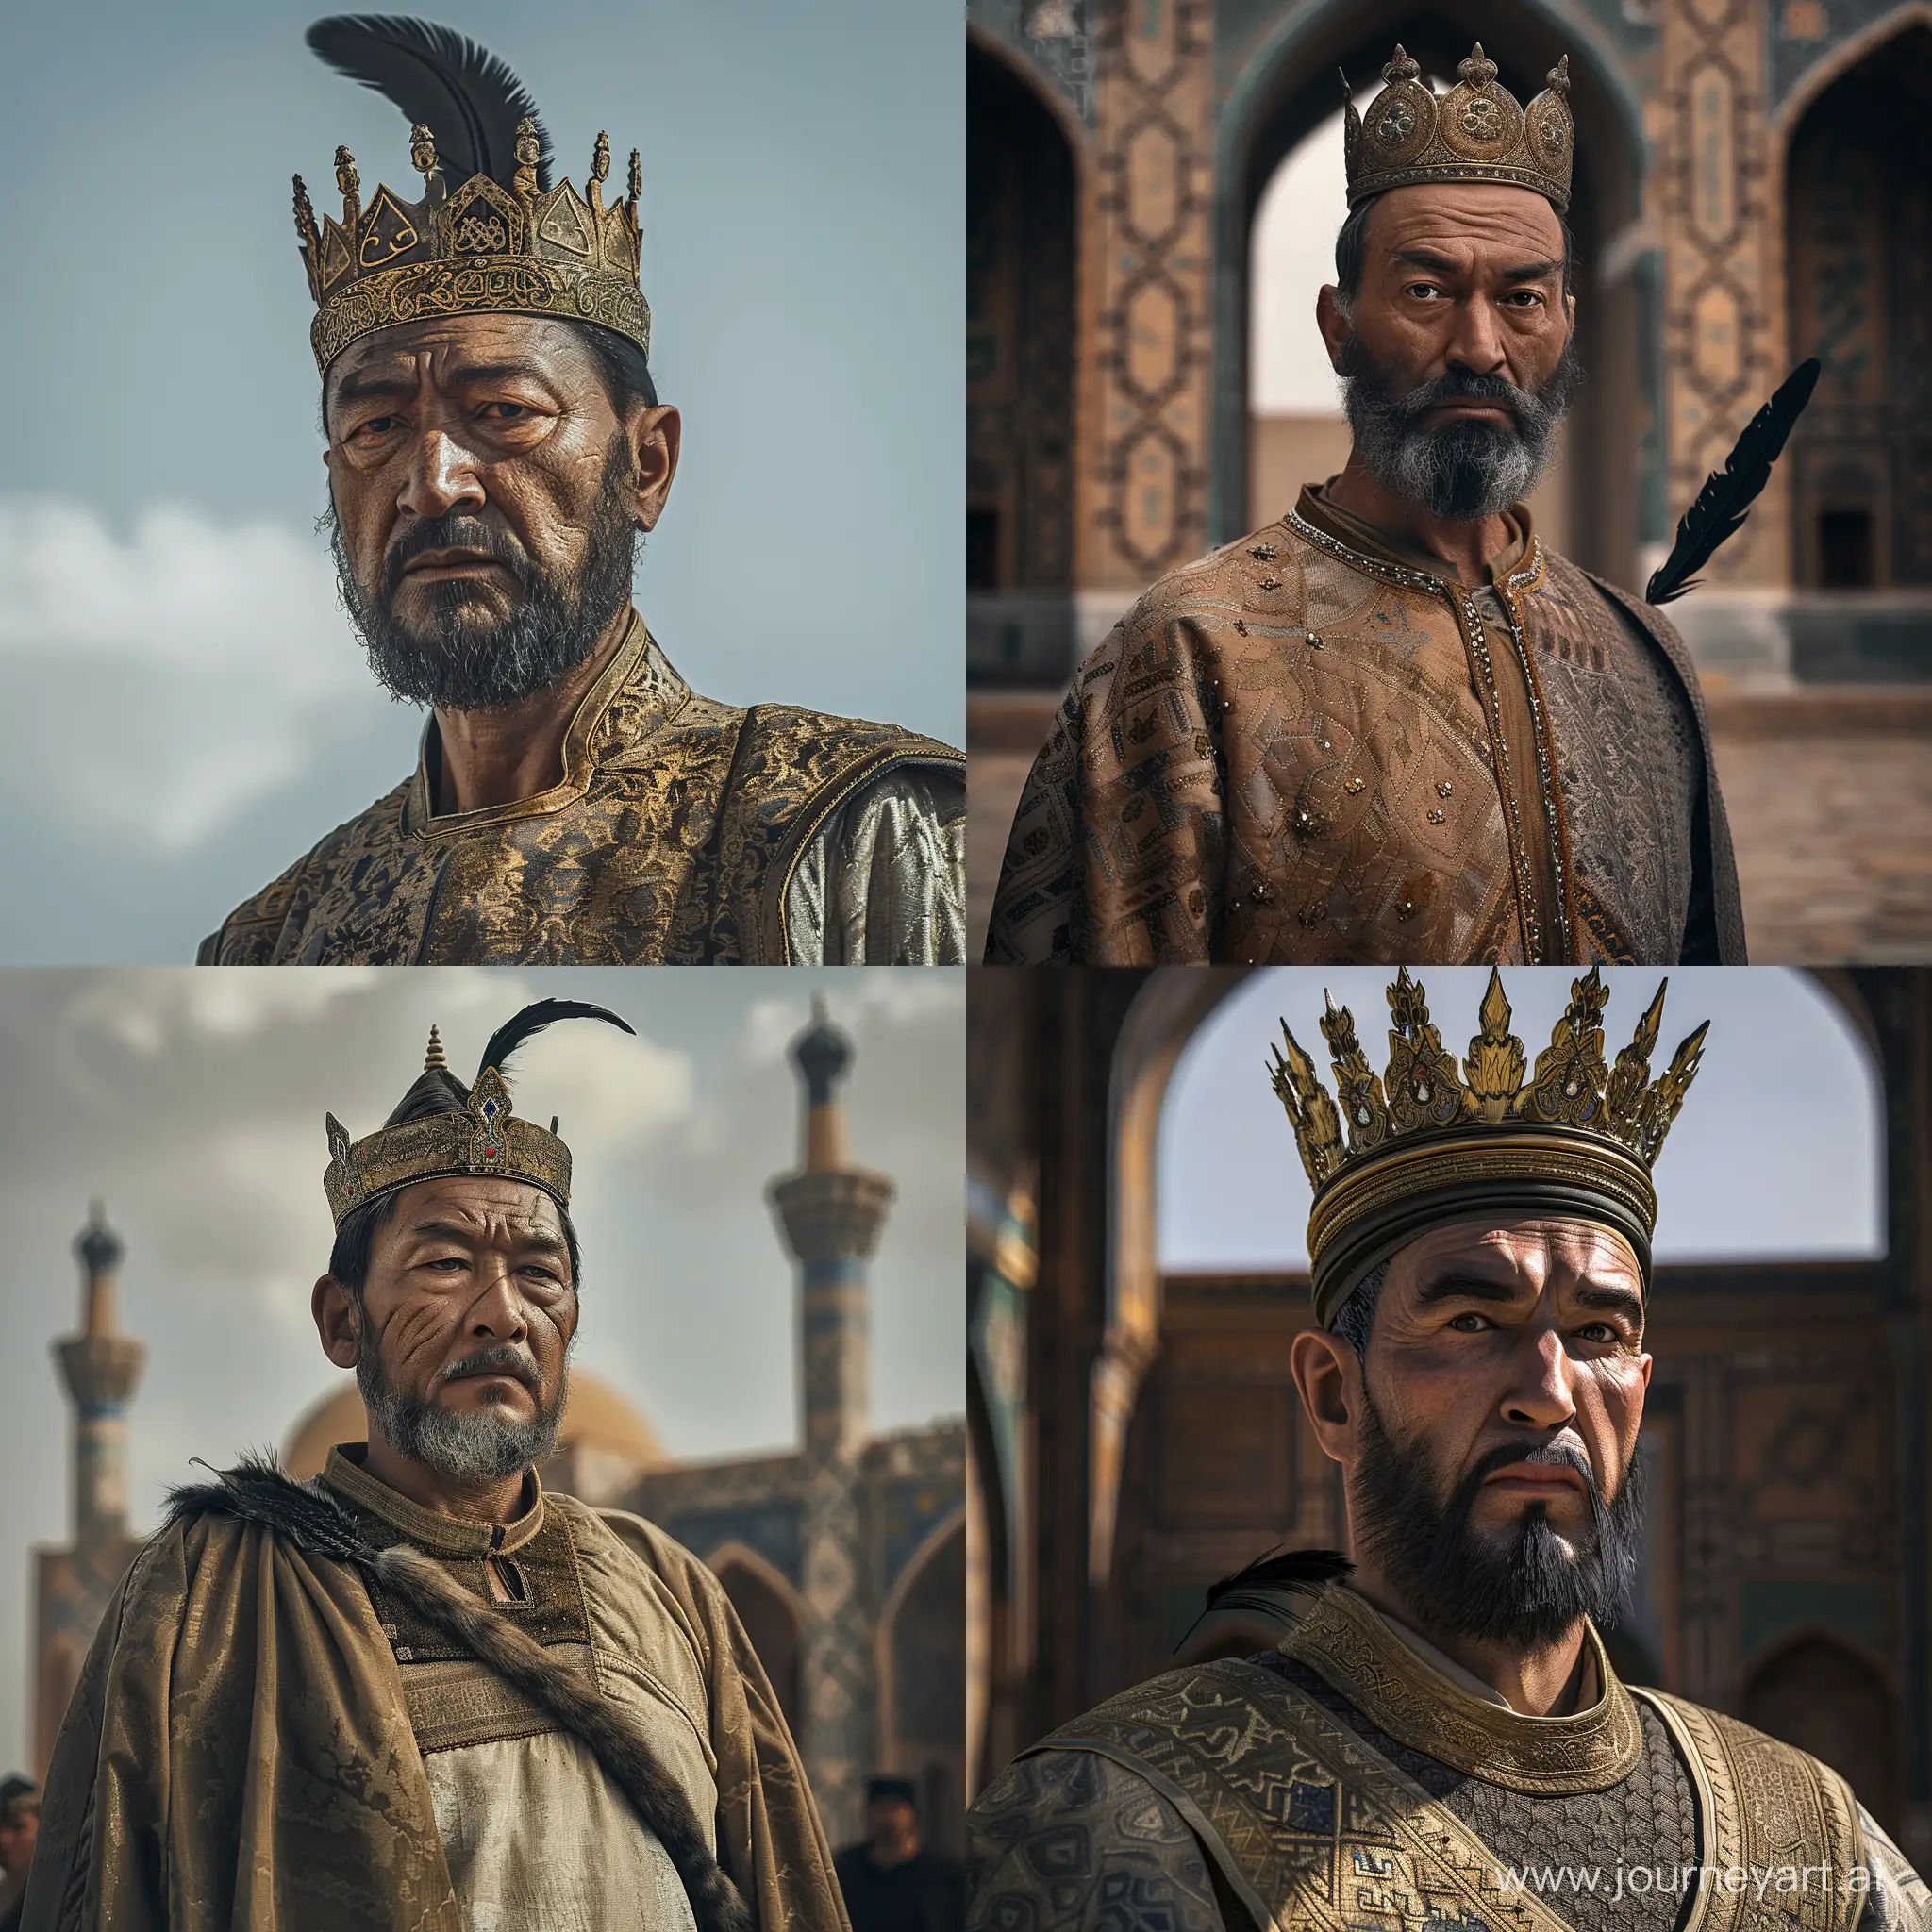 Realistic image of 60 years old Timur standing tall at Samarkand. Founder of Timurid Empire. Turko-Mongol genetics. Prominent face, high cheekbone, shaped short beard and Asian monolid slanted eyes. He is wearing a gold crown with a black feather on it. Luxury tunic and a short cloak on it. cinematic shot.